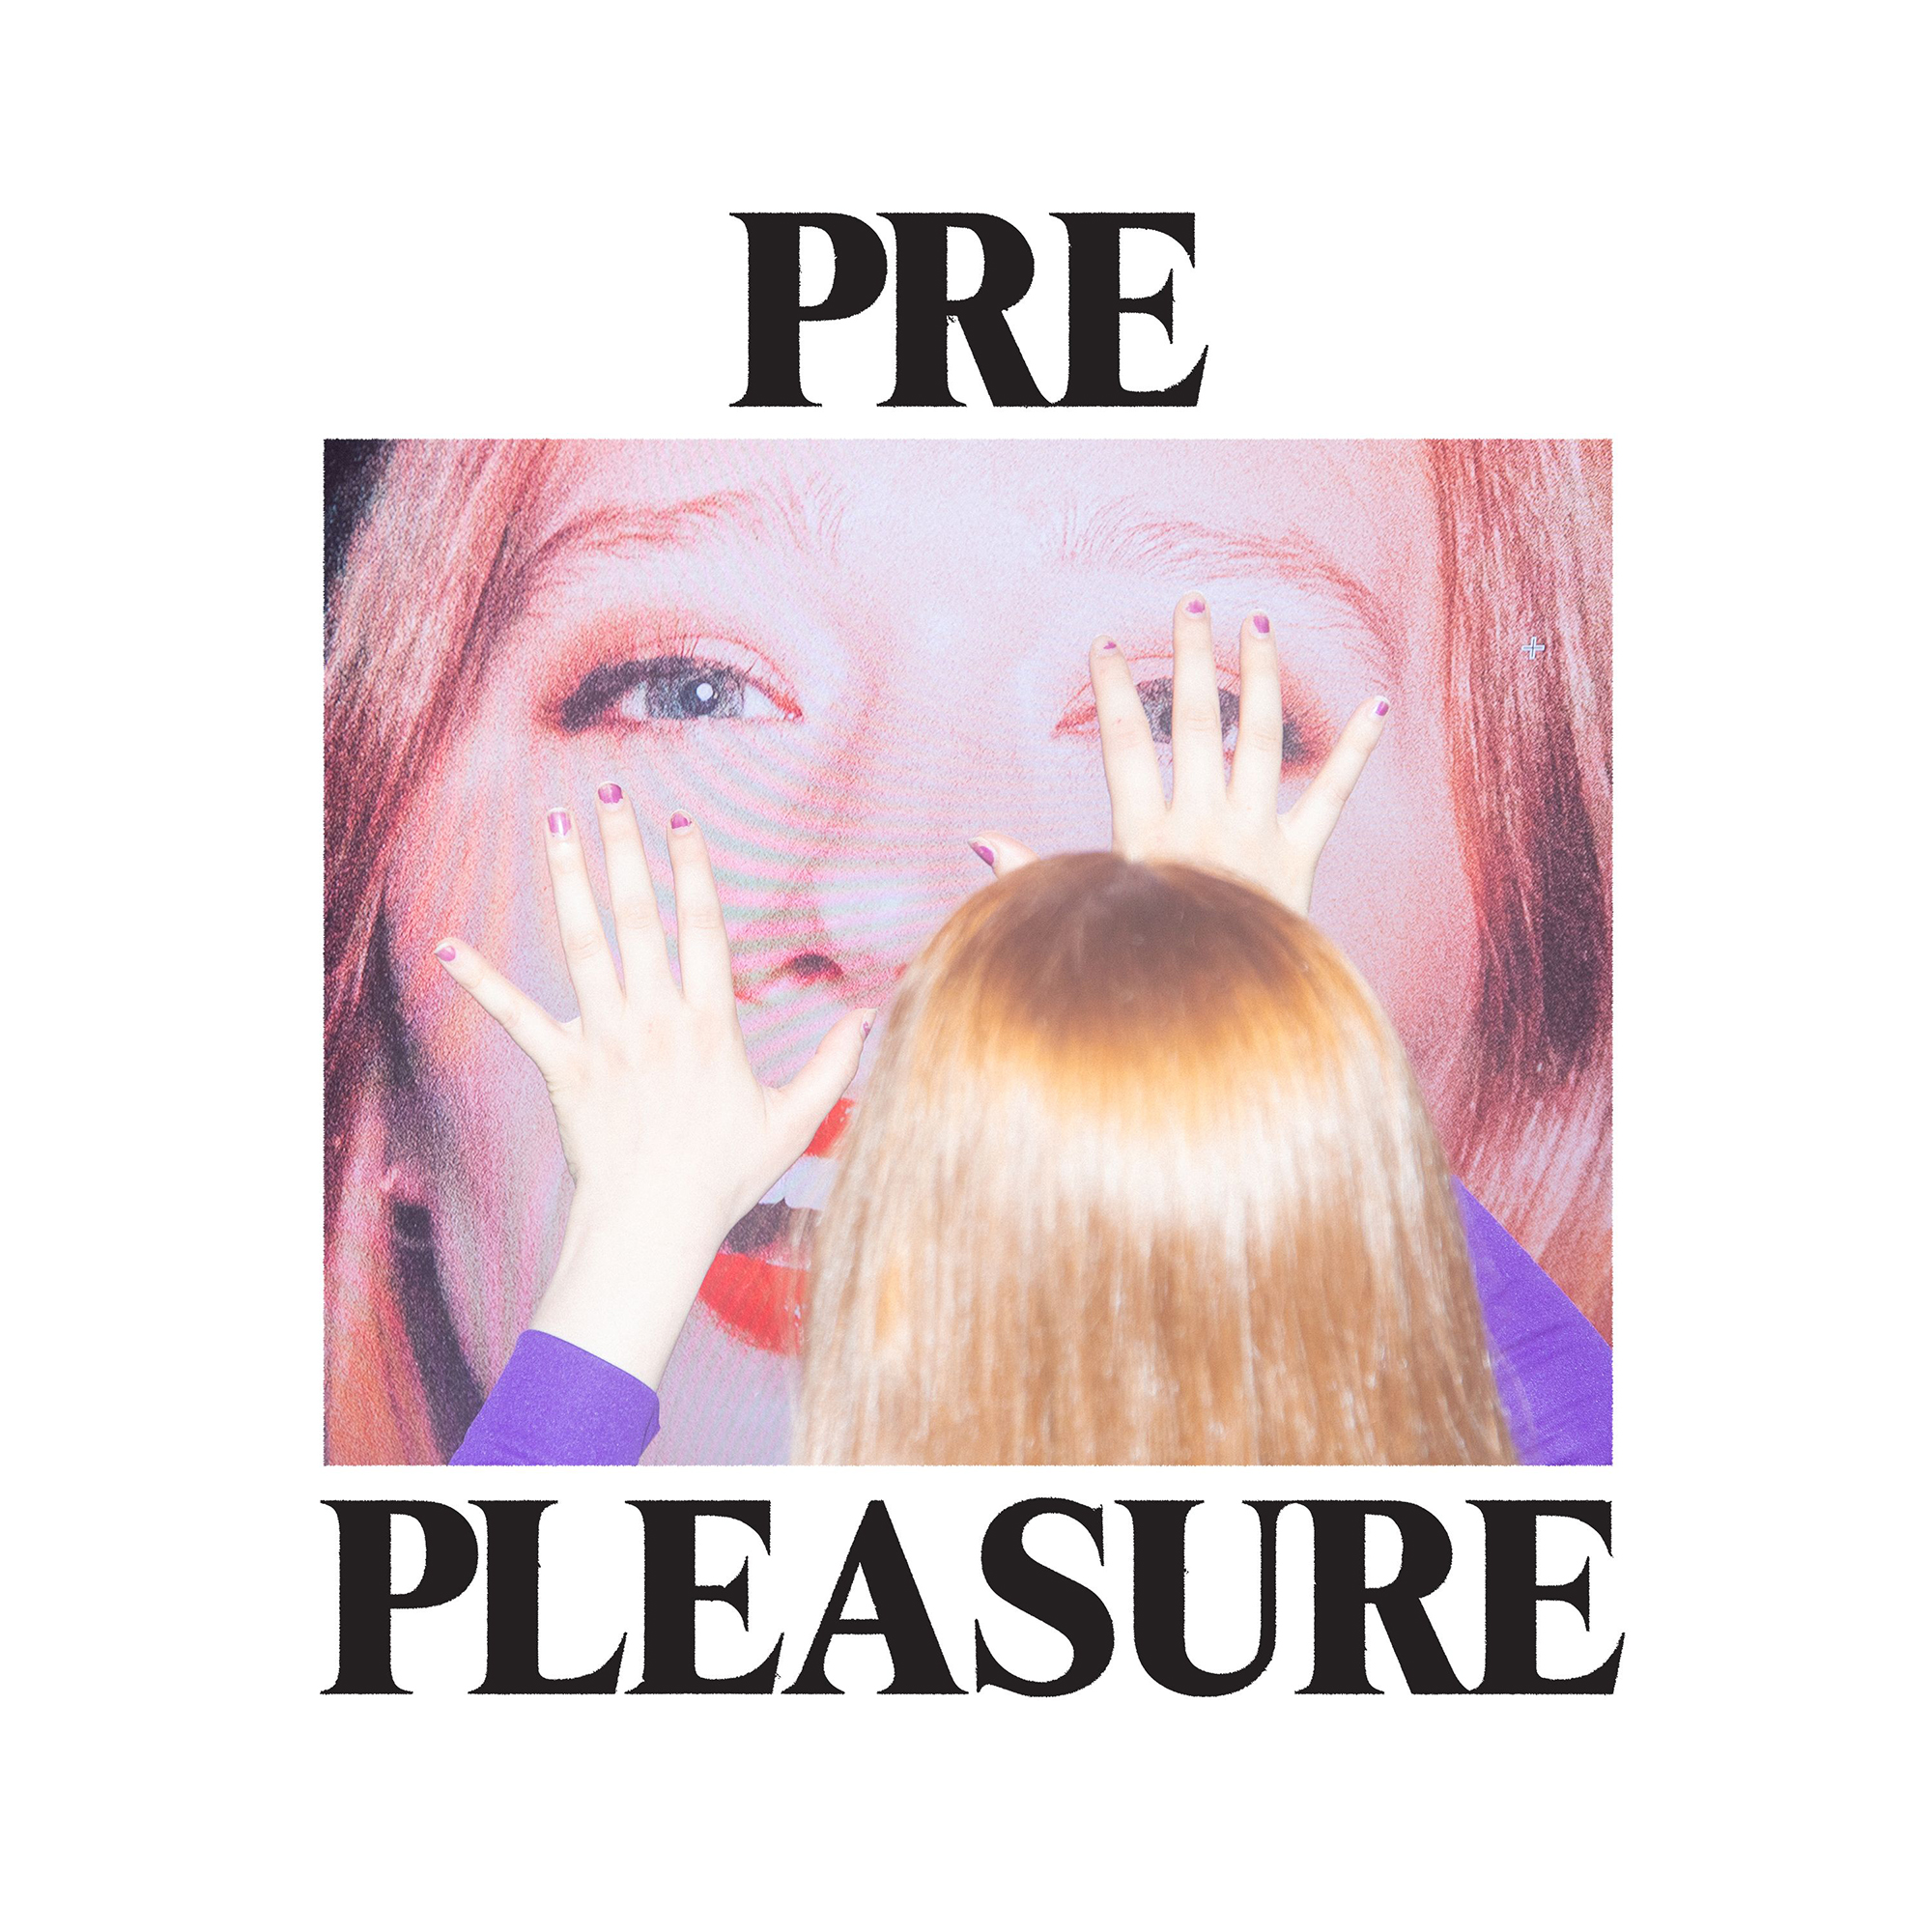 Xnxx Jaklin - Julia Jacklin - New album PRE PLEASURE out August 26, 2022. Pre-order now  and stream the first single, \